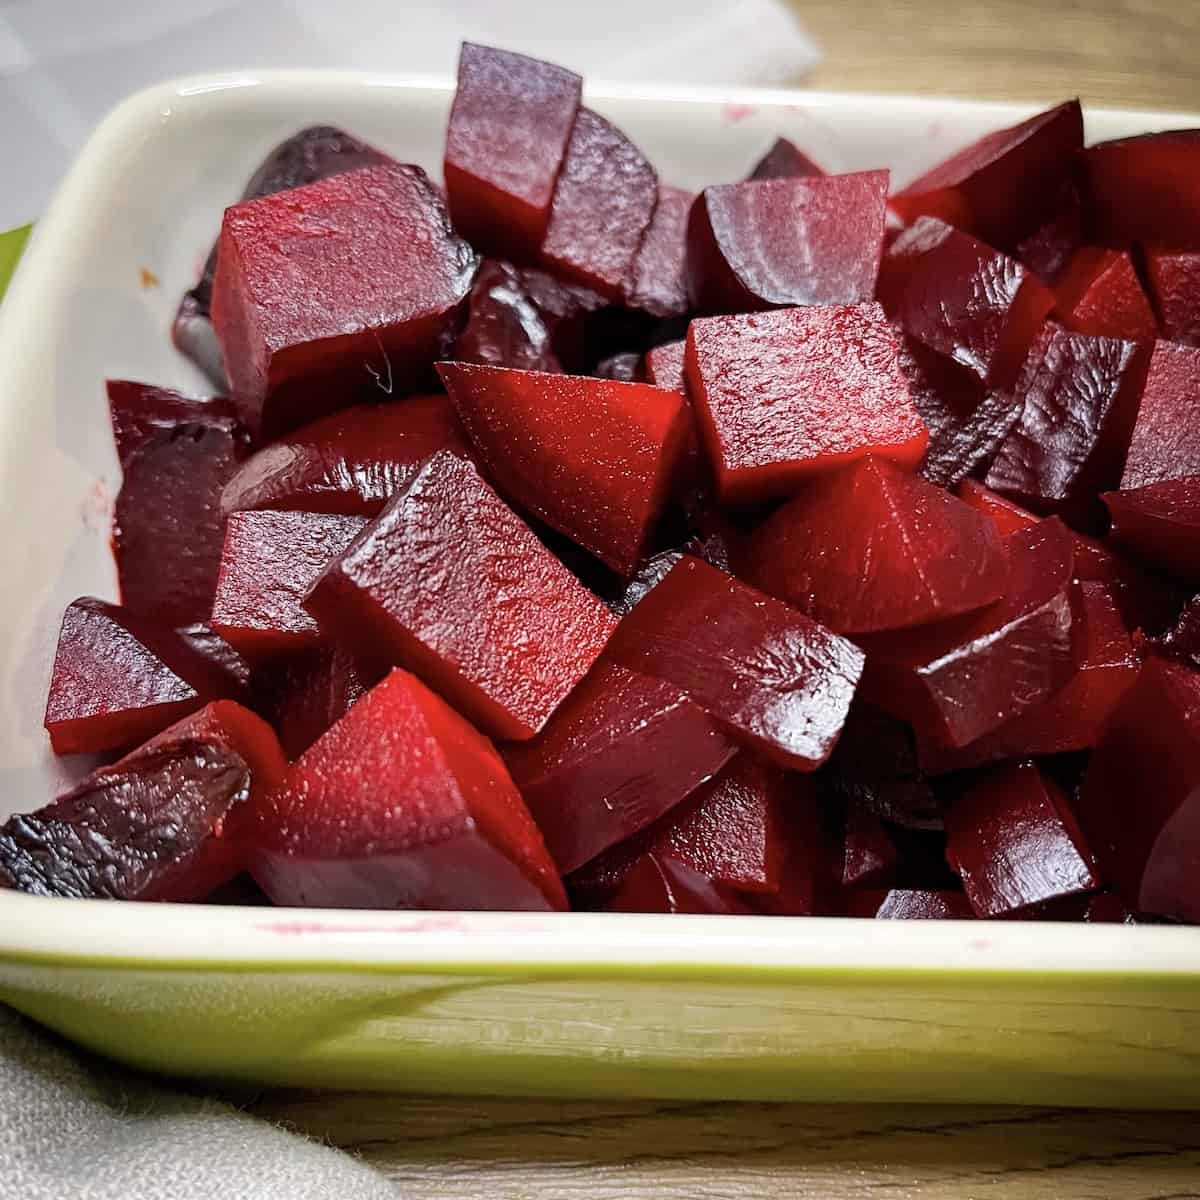 Roasted beets diced in a dish